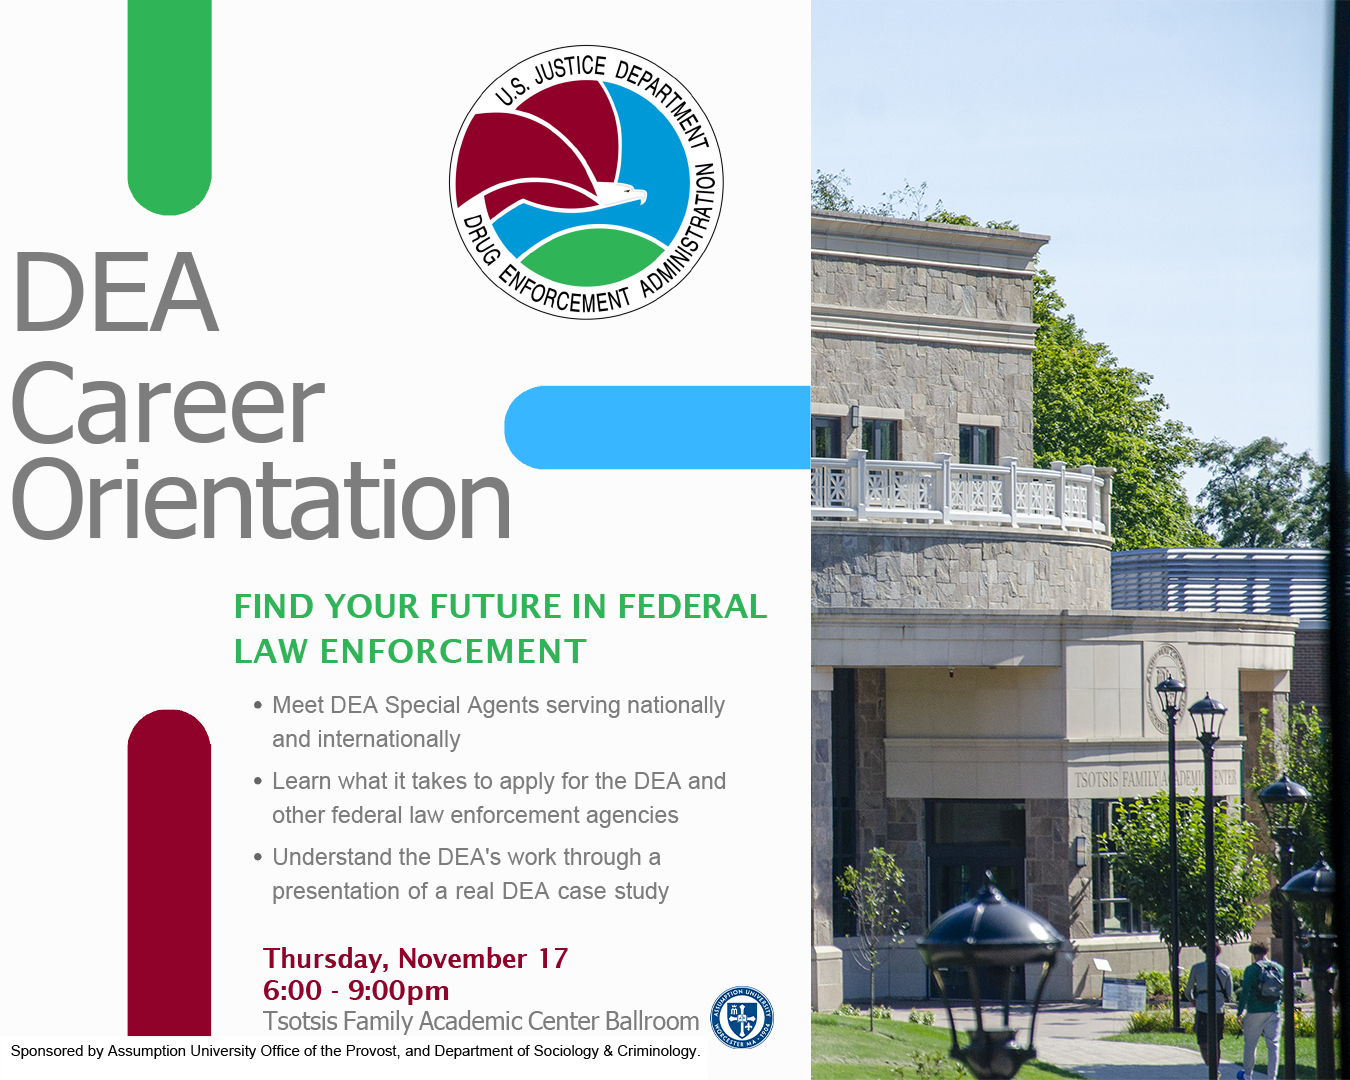 Assumption University is hosting a DEA Career Orientation for students interested in law enforcement and federal positions